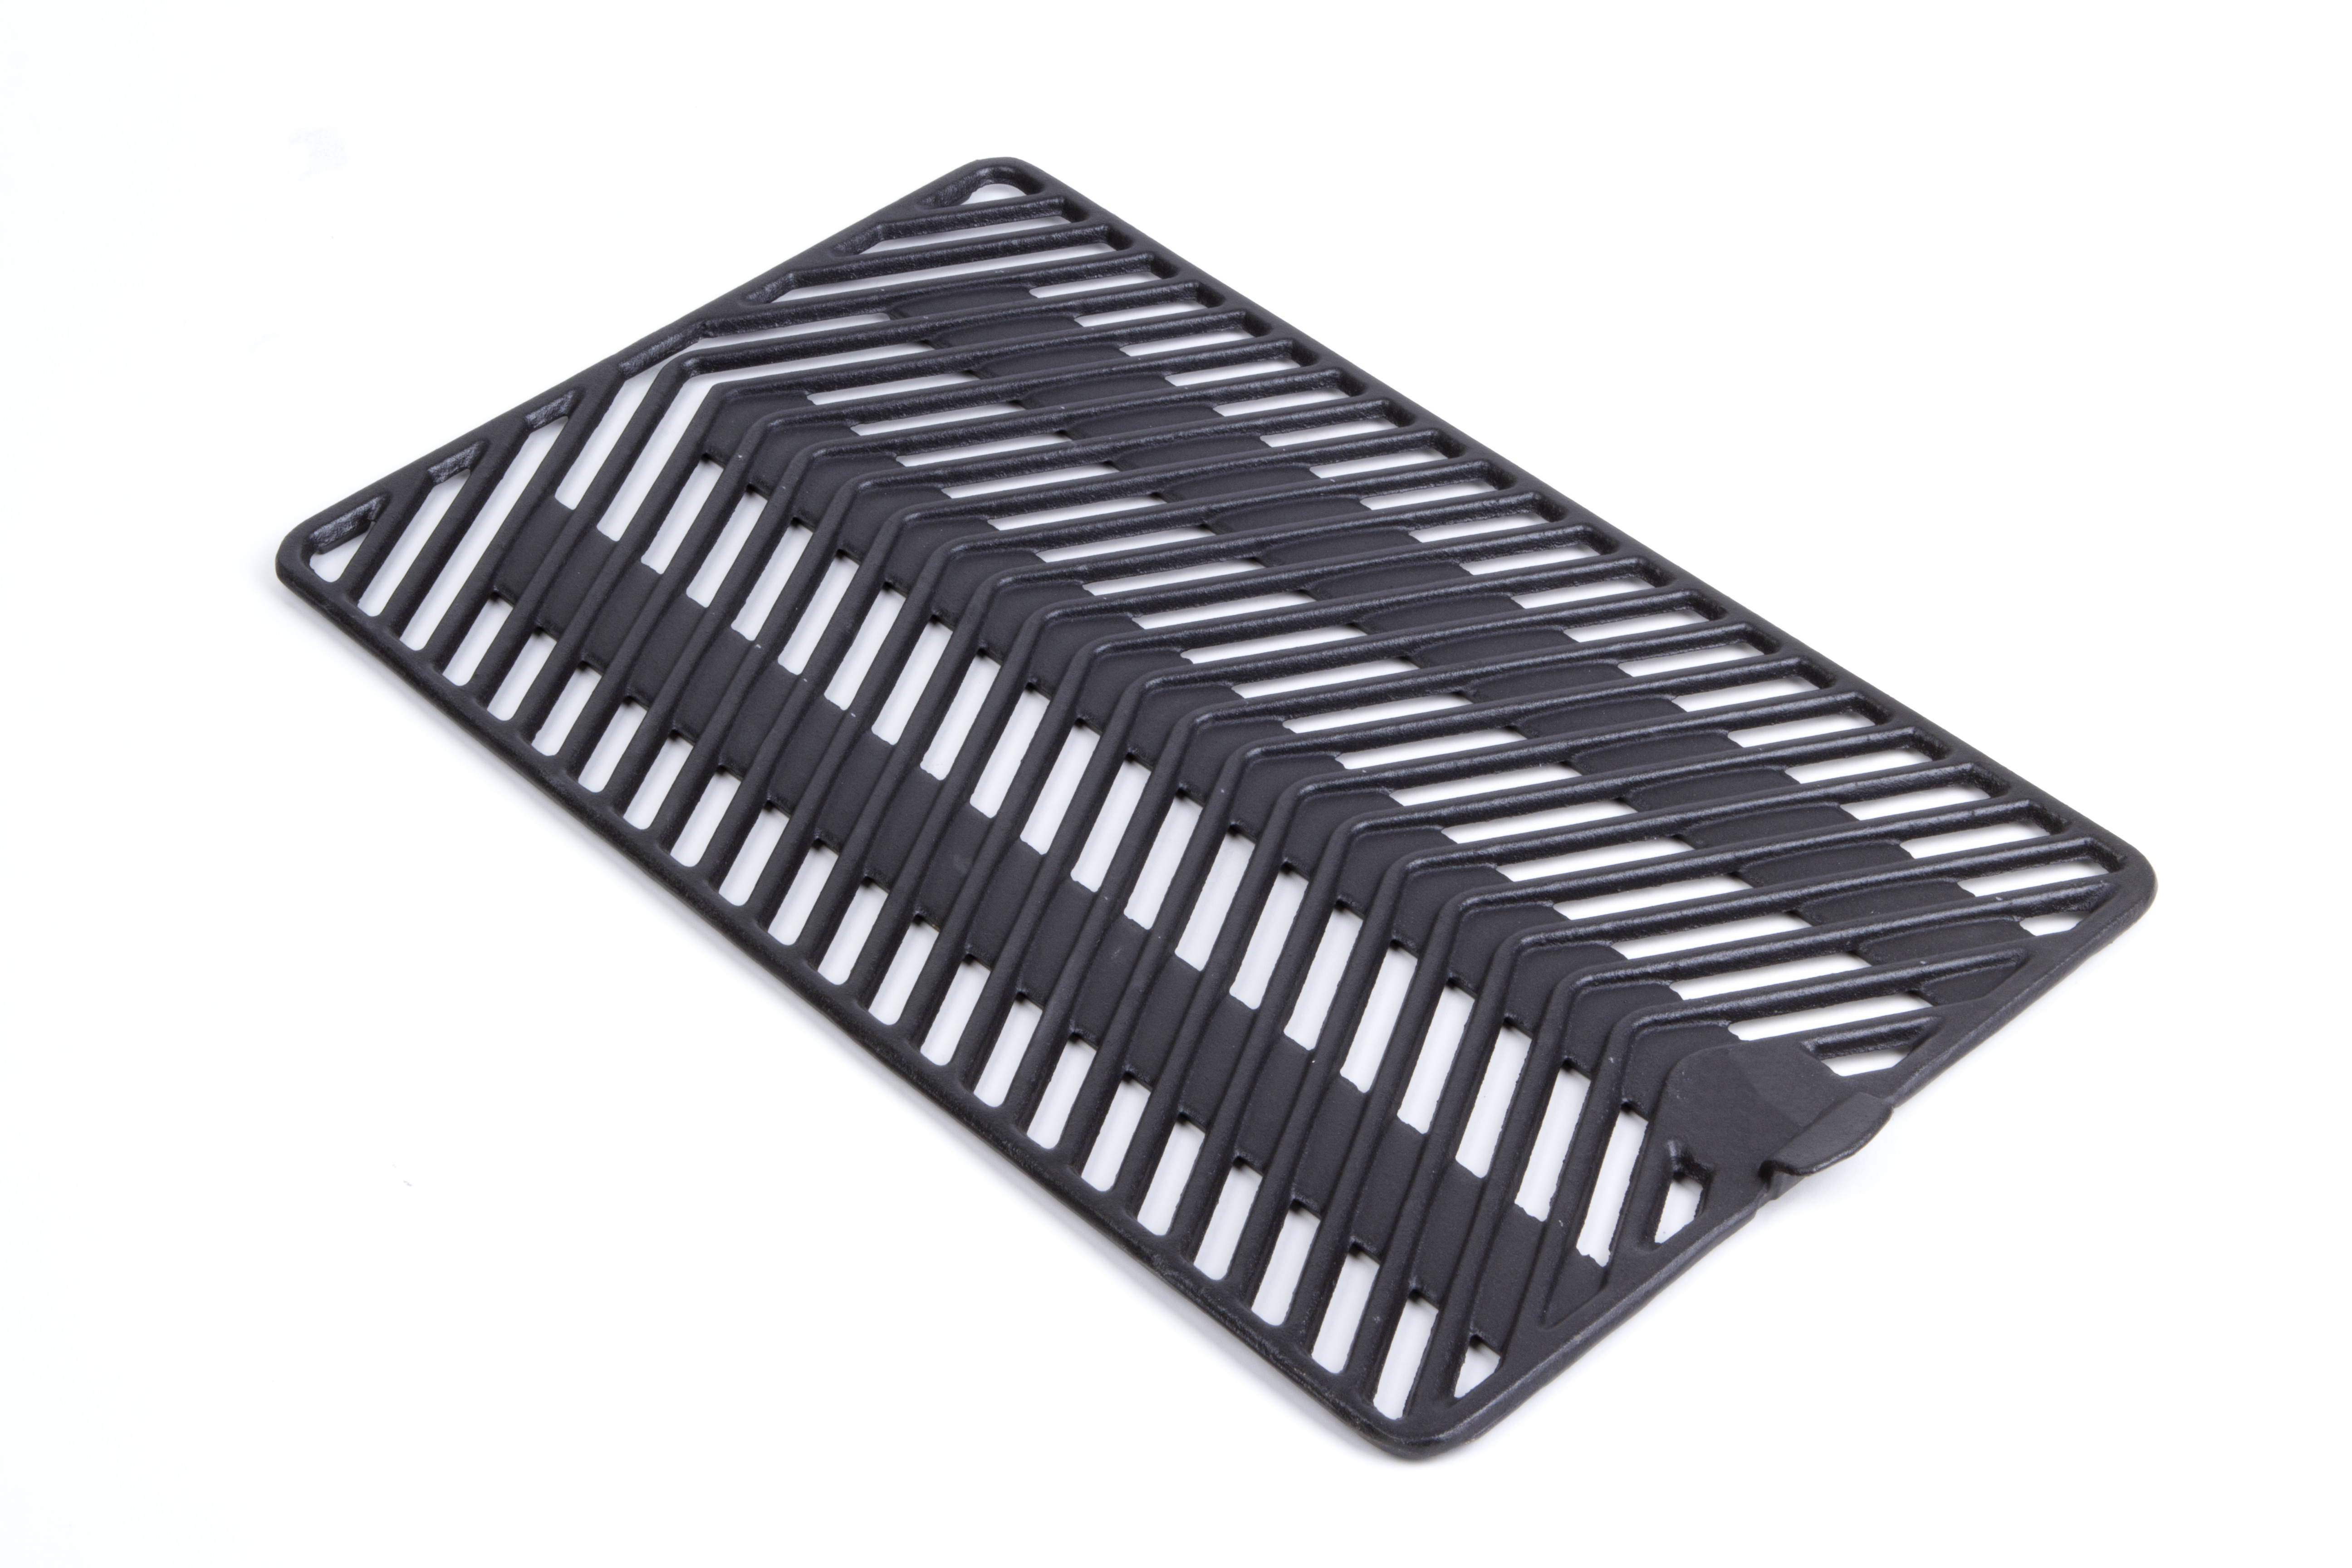 G-3 EXPL Models B100417 Replacement Cast Cooking Grid For 62503 52503 DPP11 